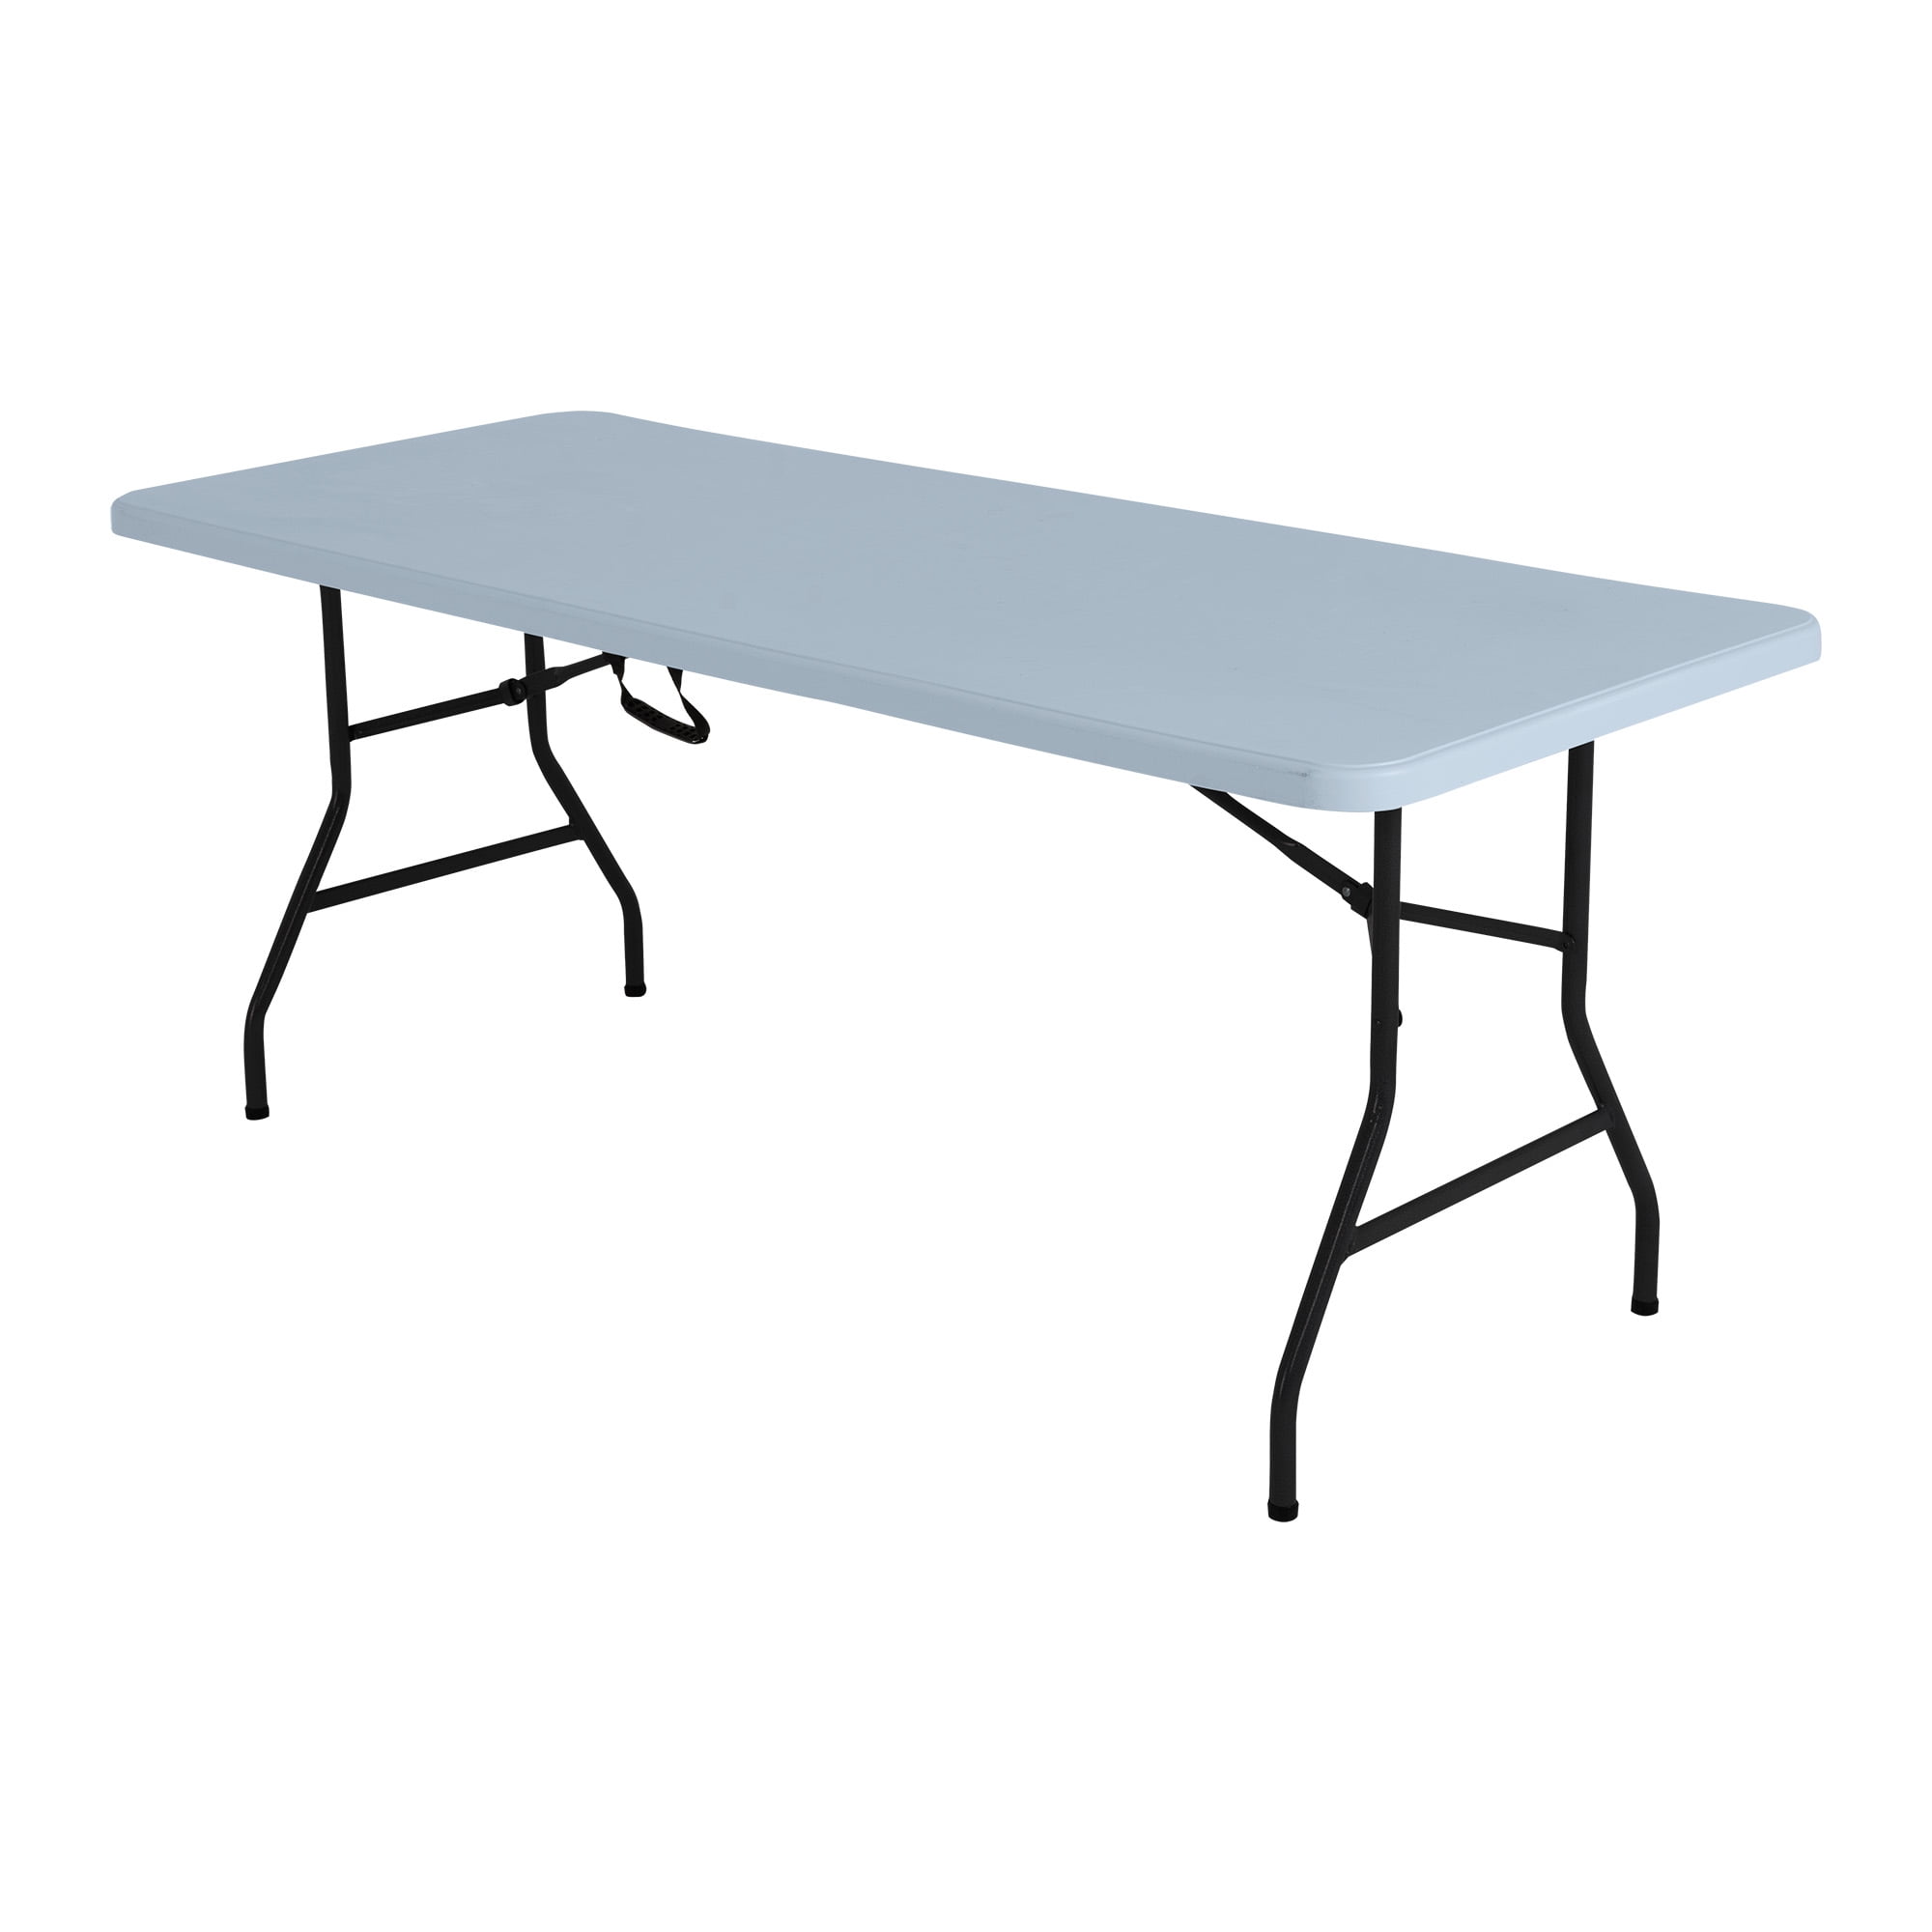 Oversized Party Folding Table 6.5 X 3 Portable Fold in Half Design -  Plastic Blow Molded Table Great for Card, Craft, Camping, Work and Hobbies  BLACK